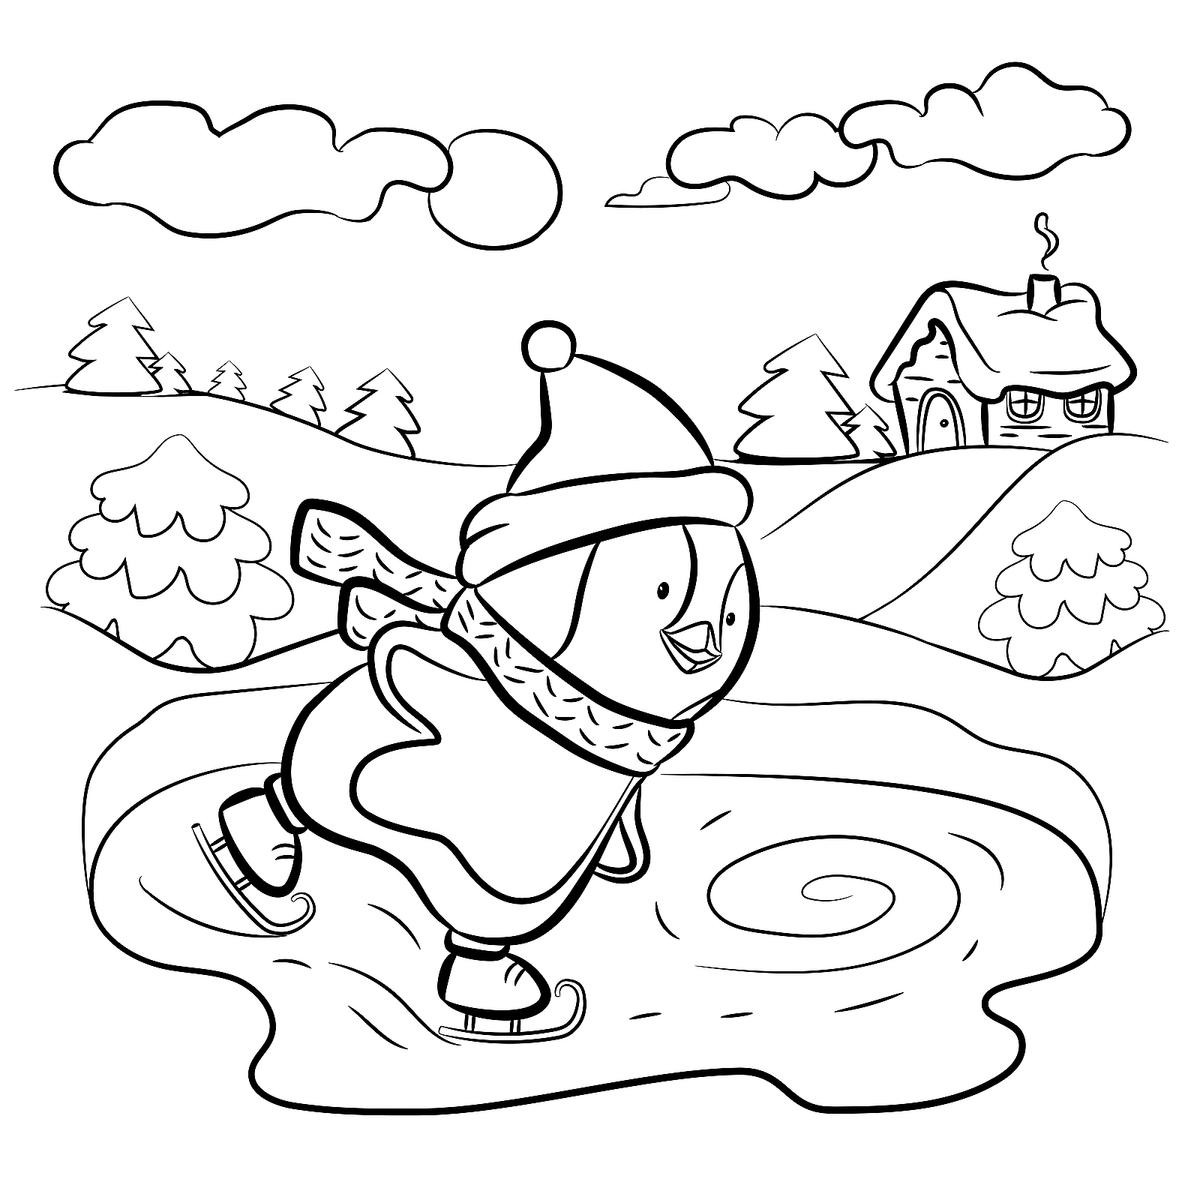 Winter Coloring Sheets Printable
 Winter Puzzle & Coloring Pages Printable Winter Themed